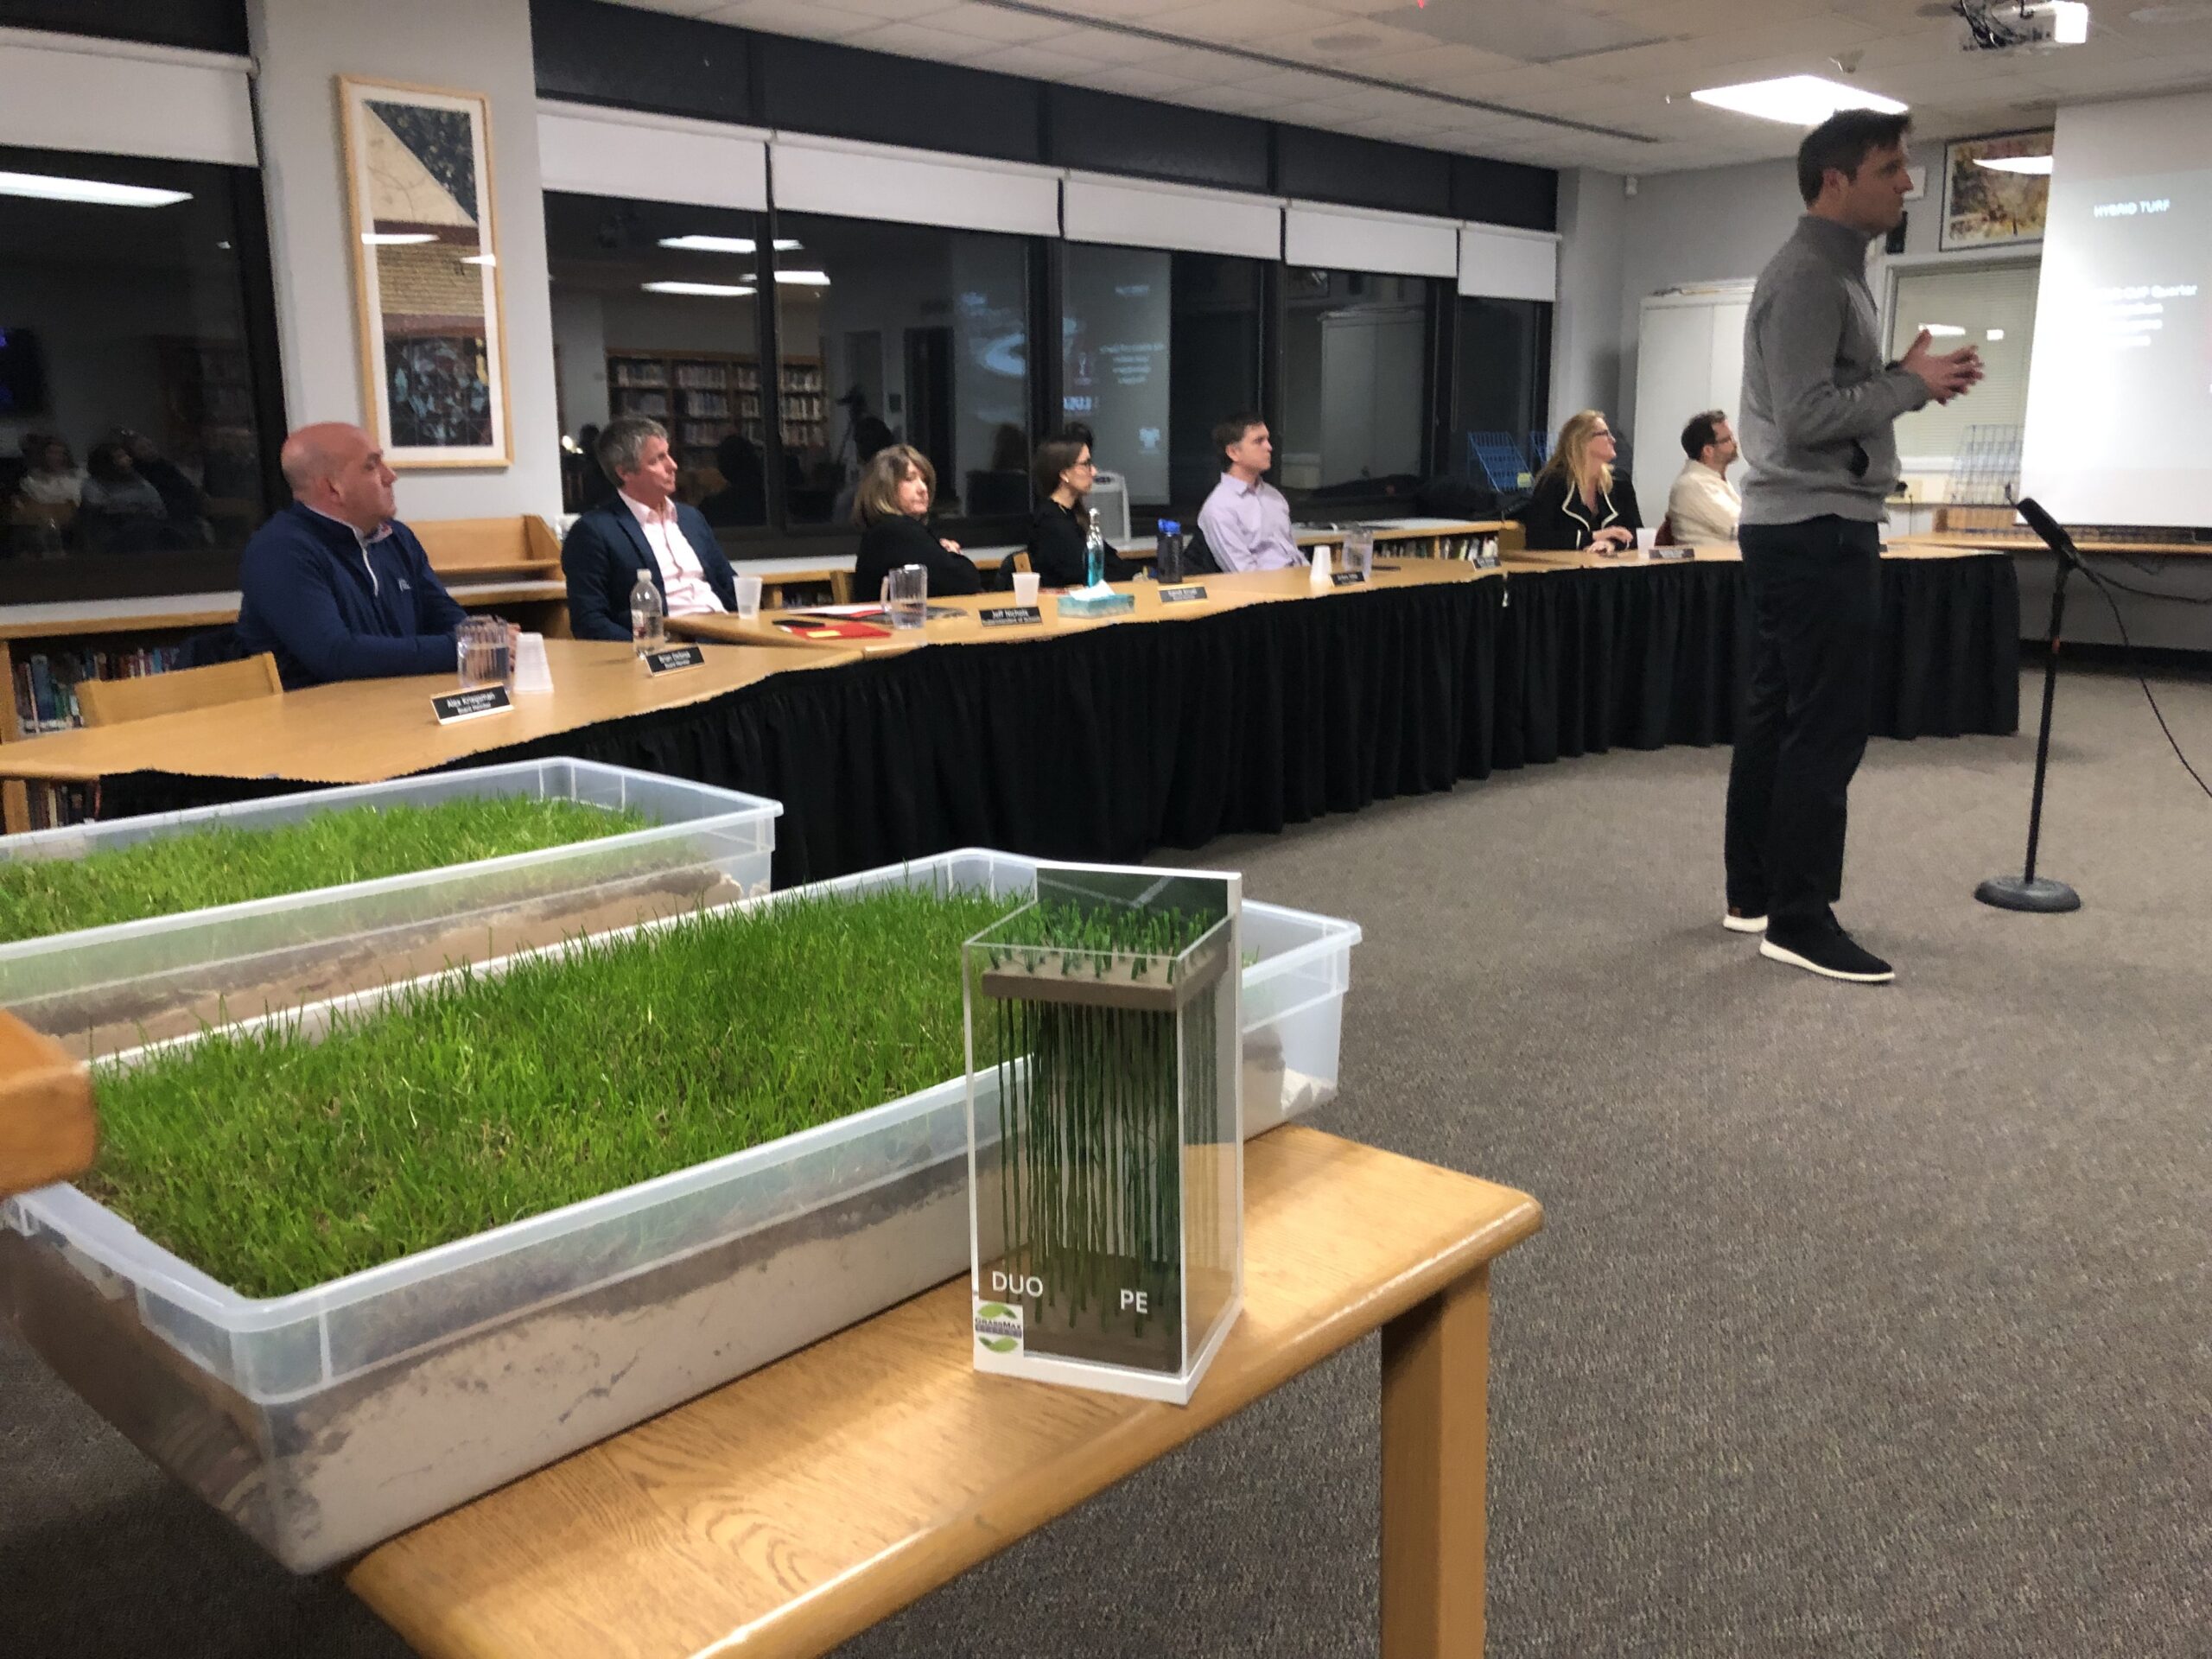 Aaron Golembiewski, a representative from the hybrid turf company, Turf Talents, made a presentation at the second community forum on the Marsden lots at the Pierson library on Wednesday night. CAILIN RILEY